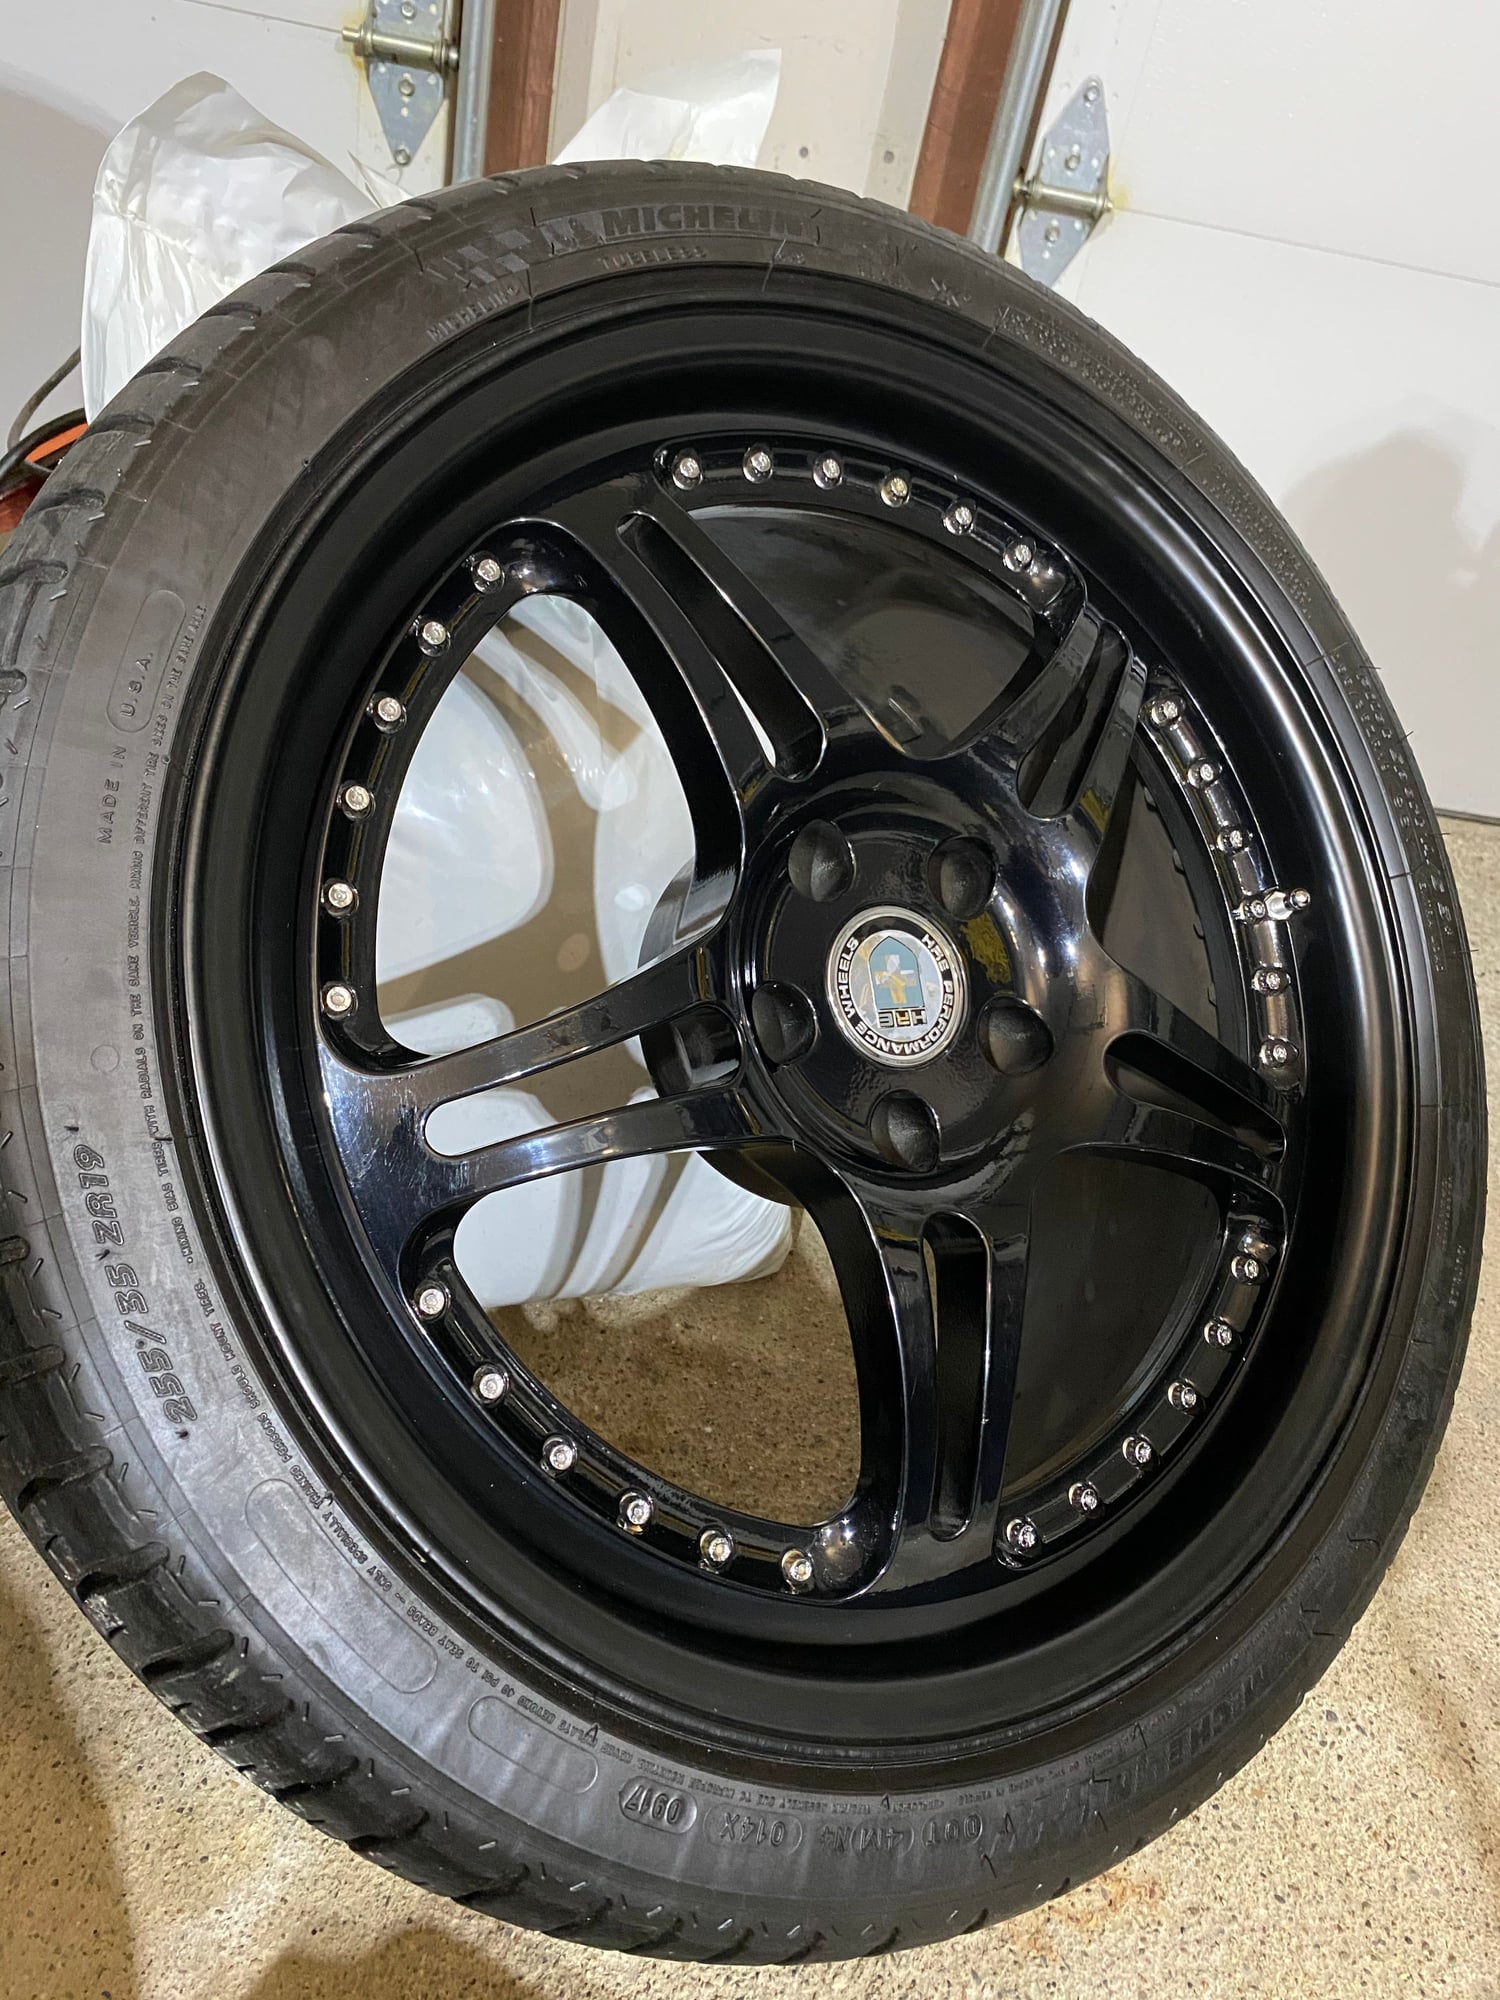 Wheels and Tires/Axles - HRE 547 - 19" Forged 3 Piece Wheels WITH Michelin Tires - Used - Wayne, NJ 07470, United States